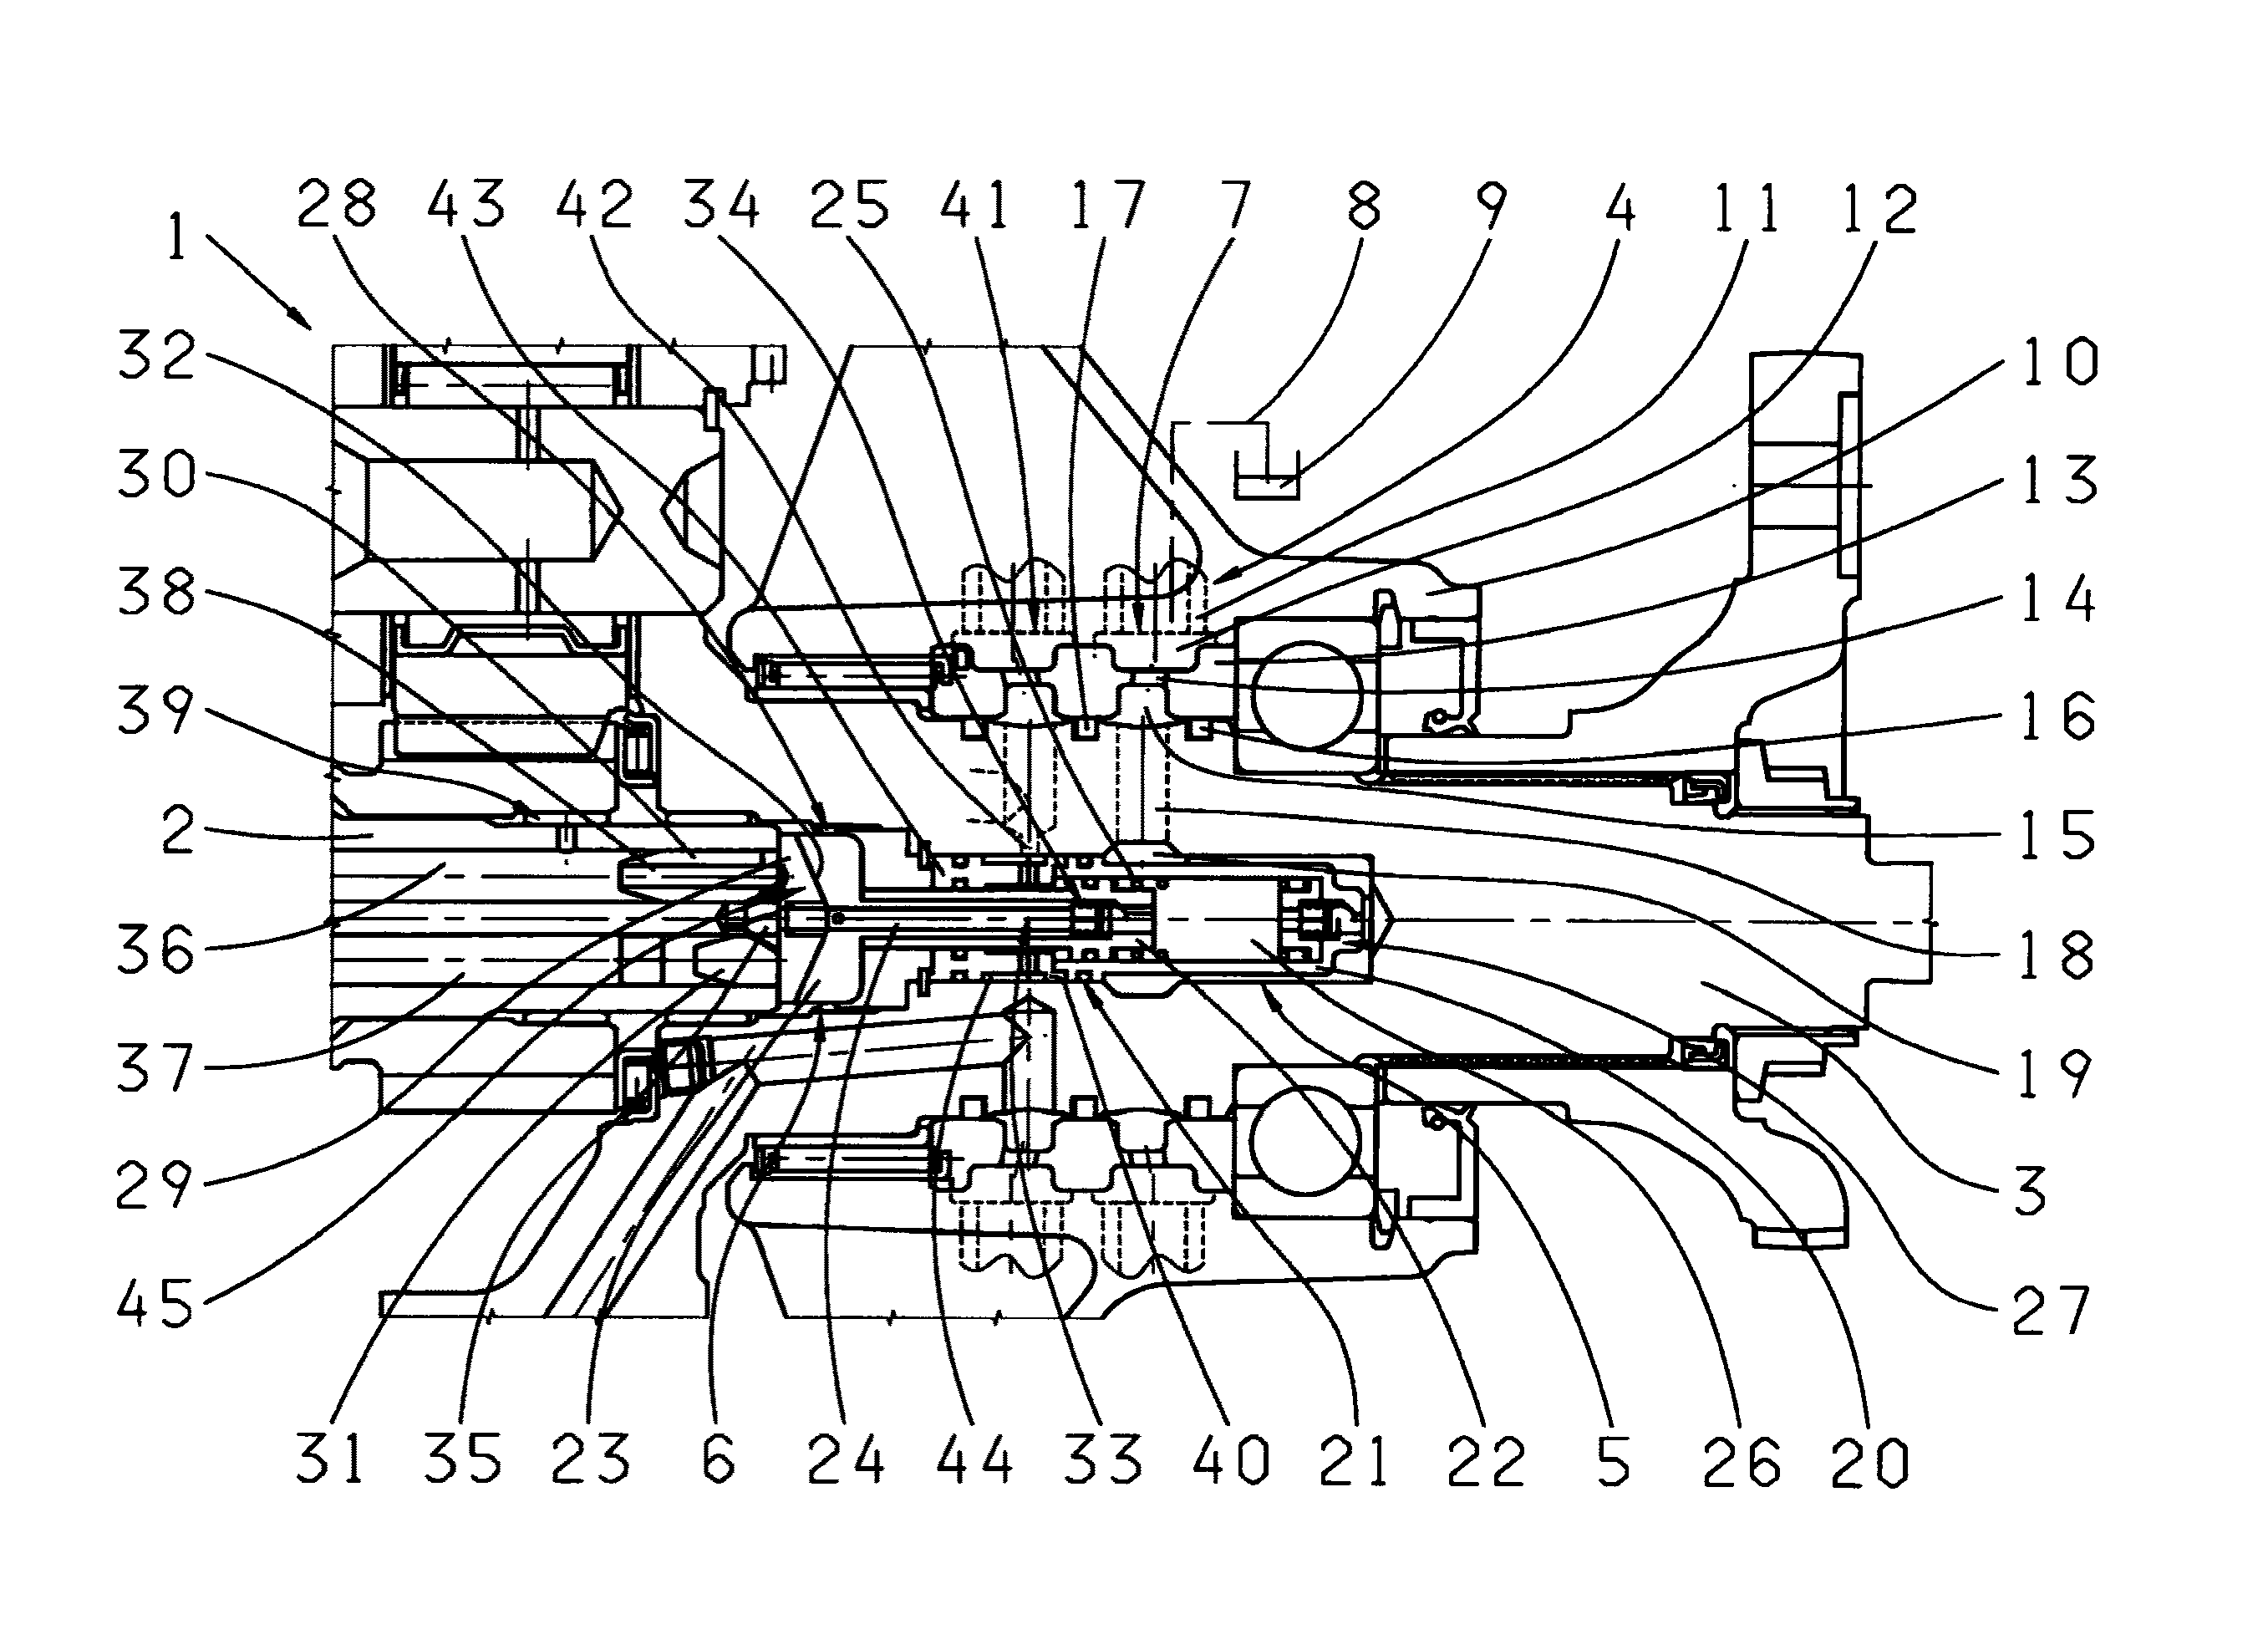 Transmission device with a hydraulic system comprising a transmission main pump apparatus